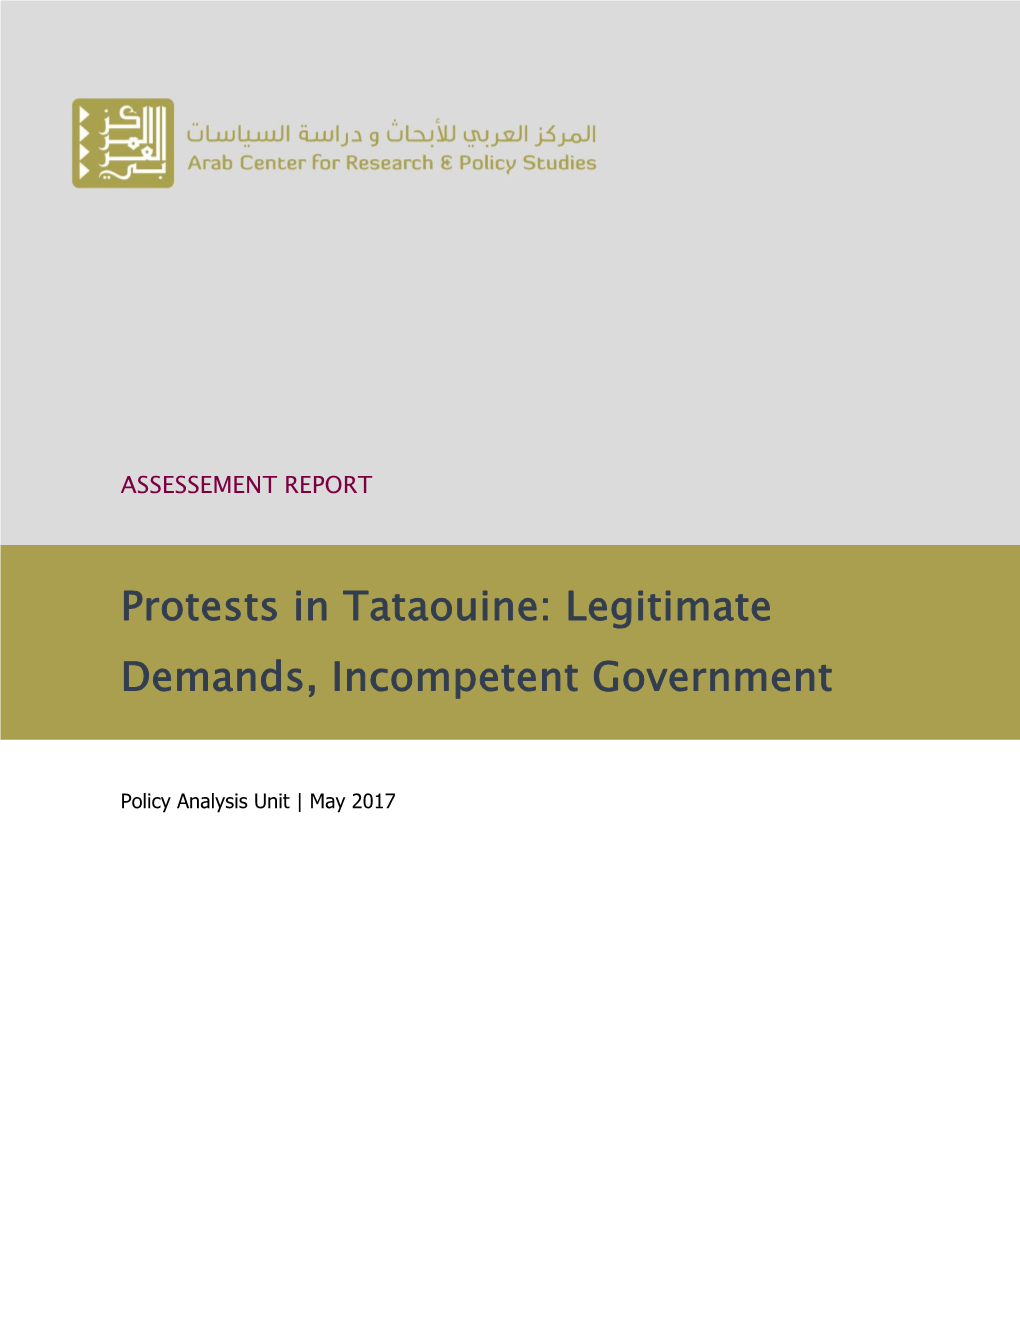 Protests in Tataouine: Legitimate Demands, Incompetent Government